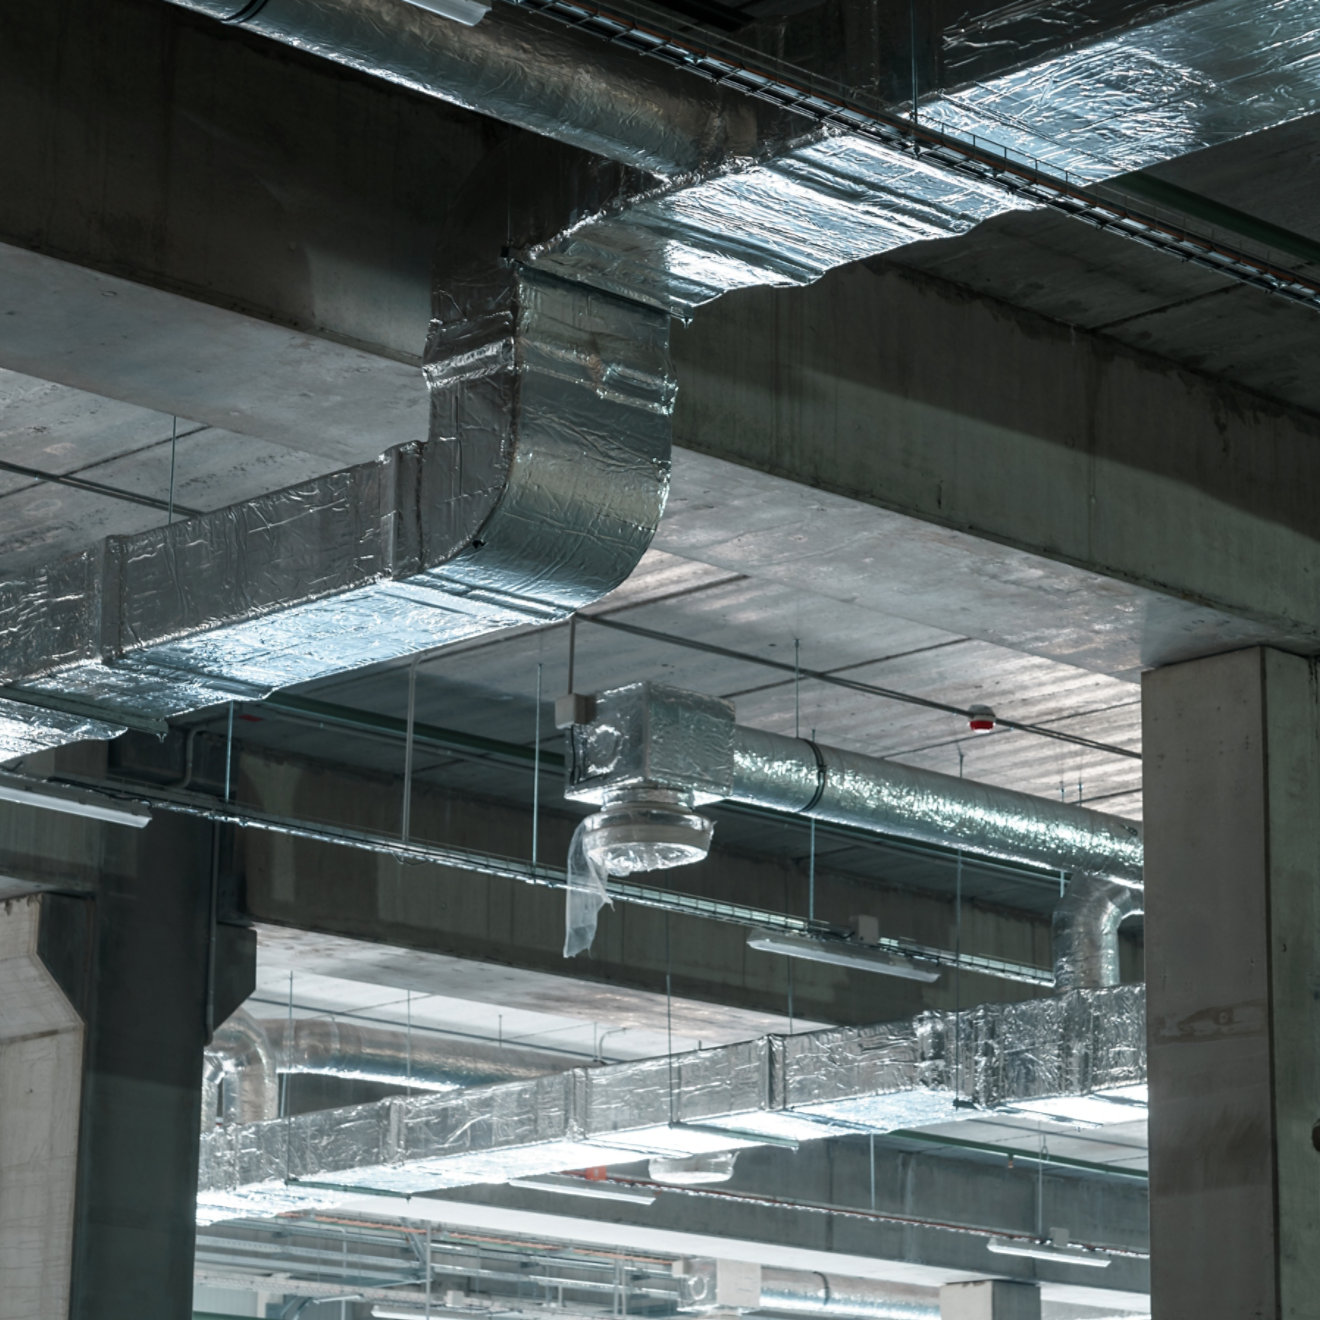 Air ventilation system on the ceiling in a large warehouse. Pipes made of silver insulating material hang from the ceiling inside the new building